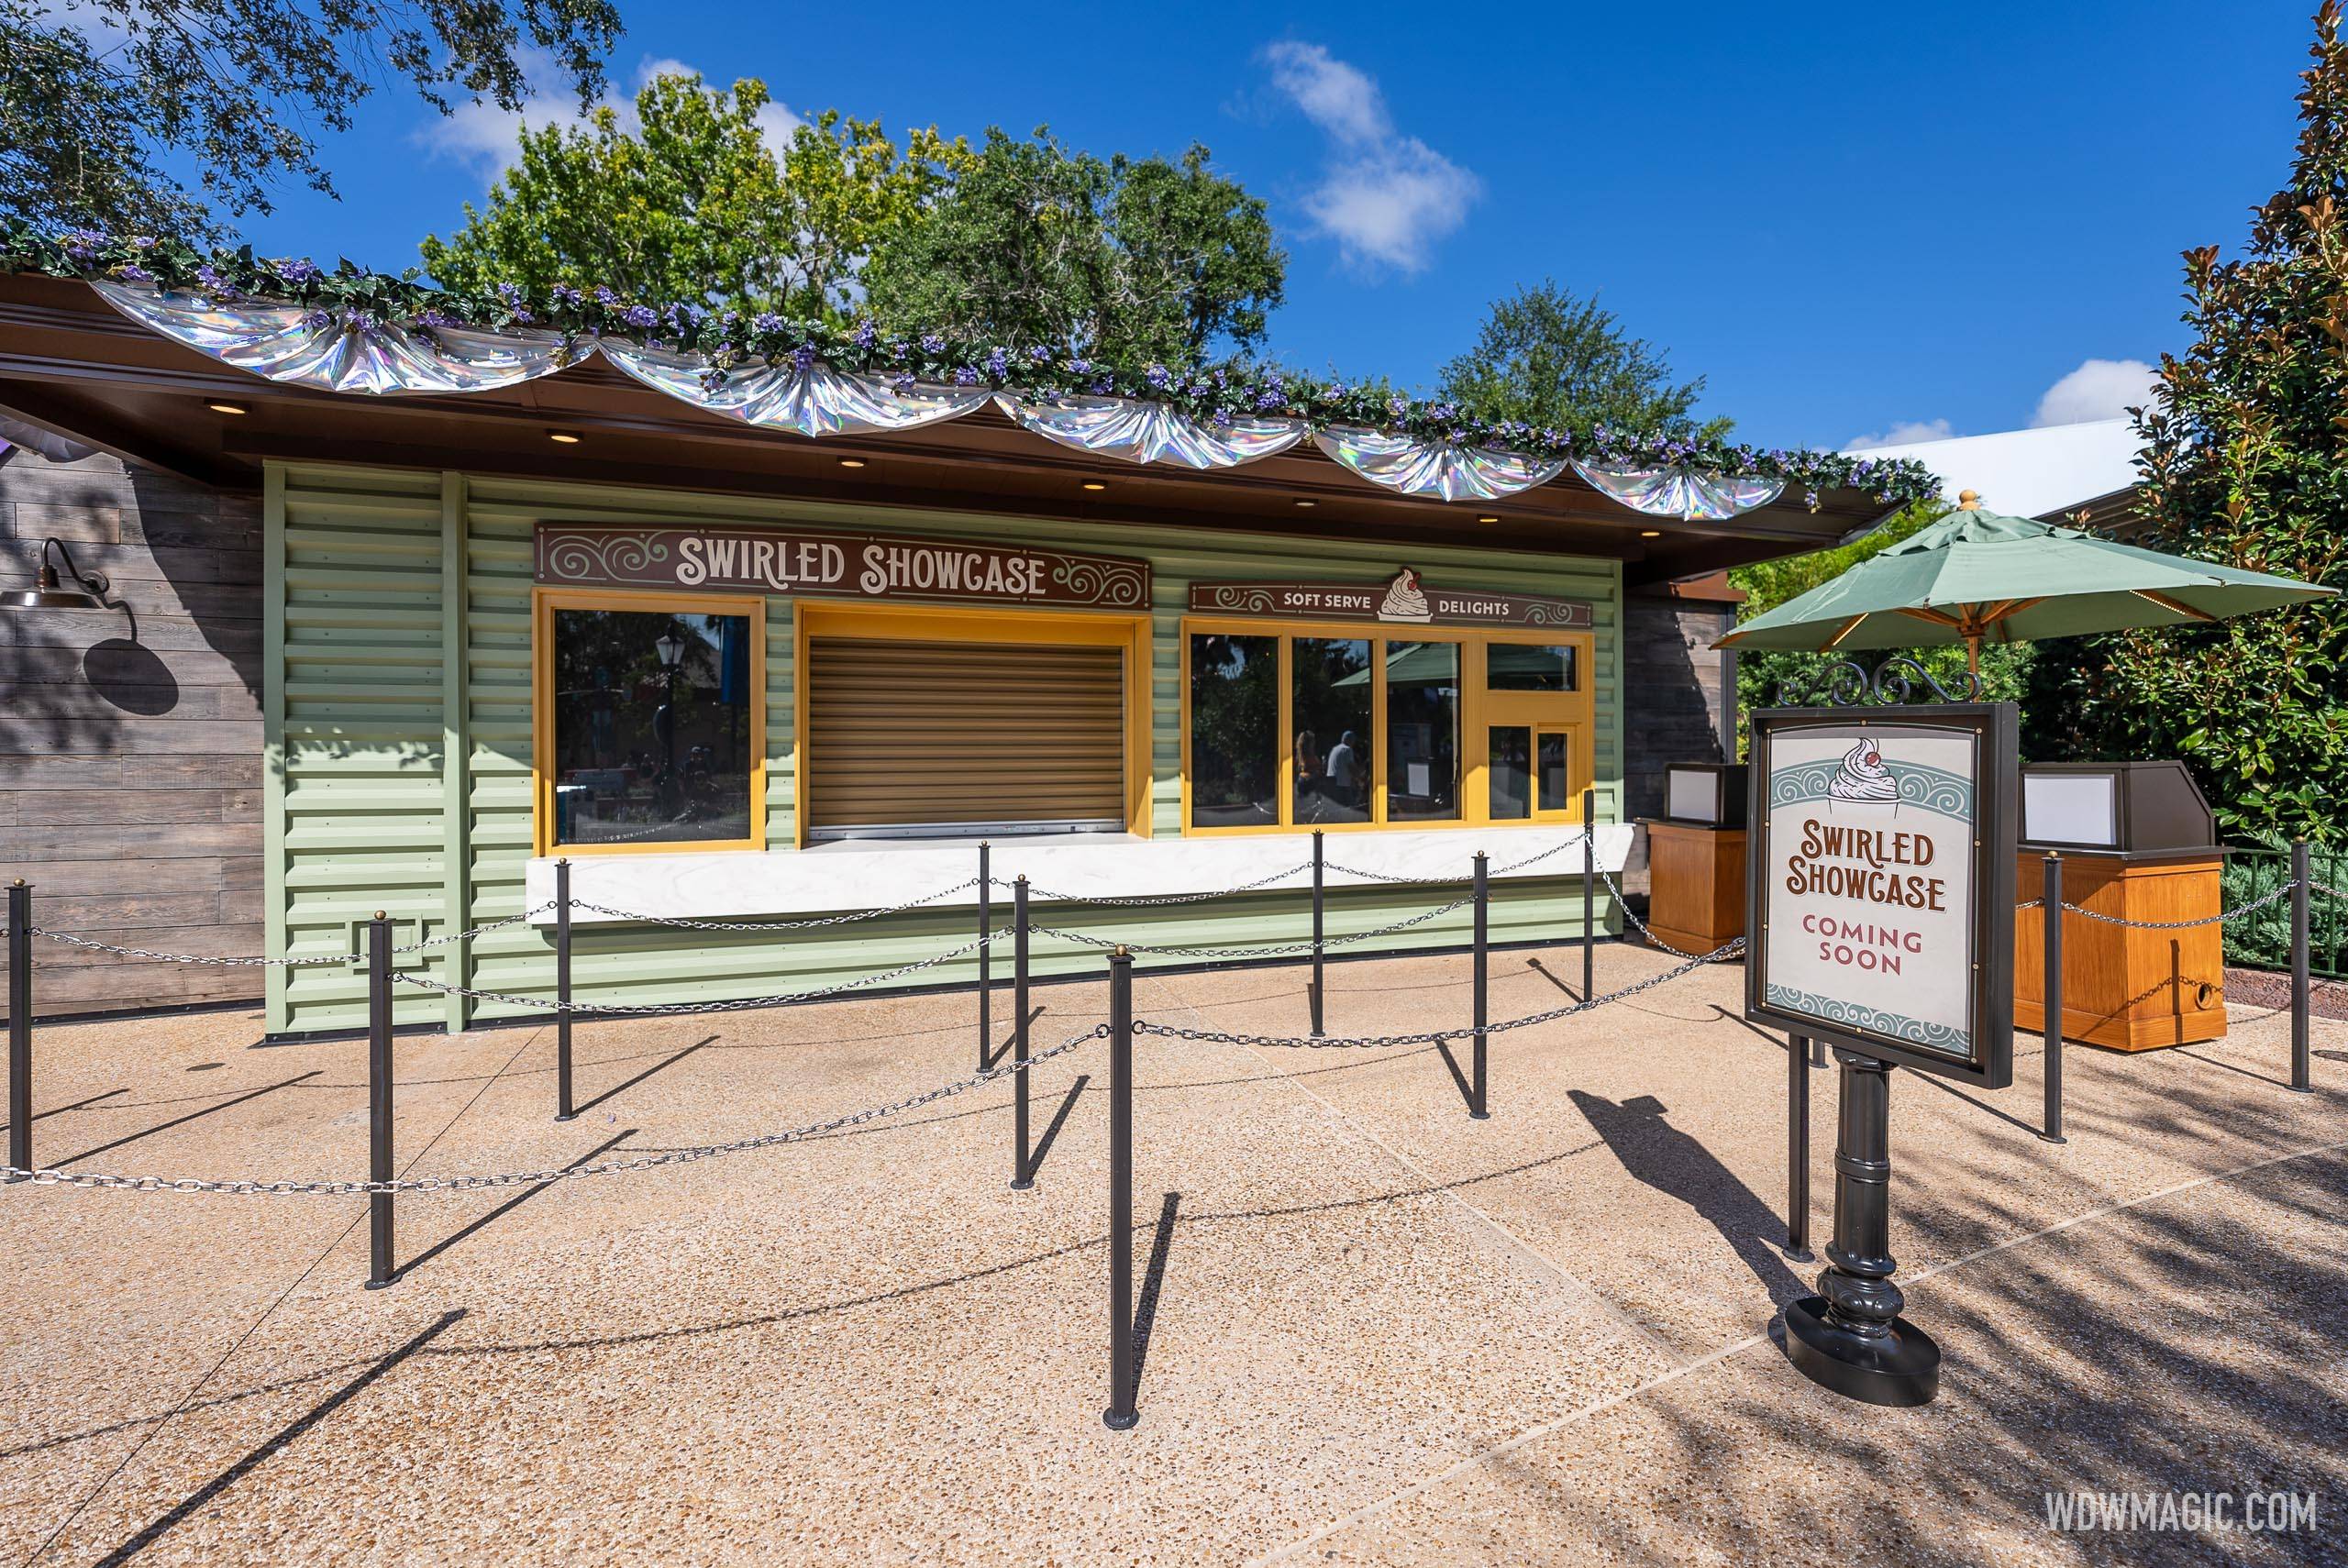 New Disney100 kiosks add more flavor to the EPCOT International Food and Wine Festival